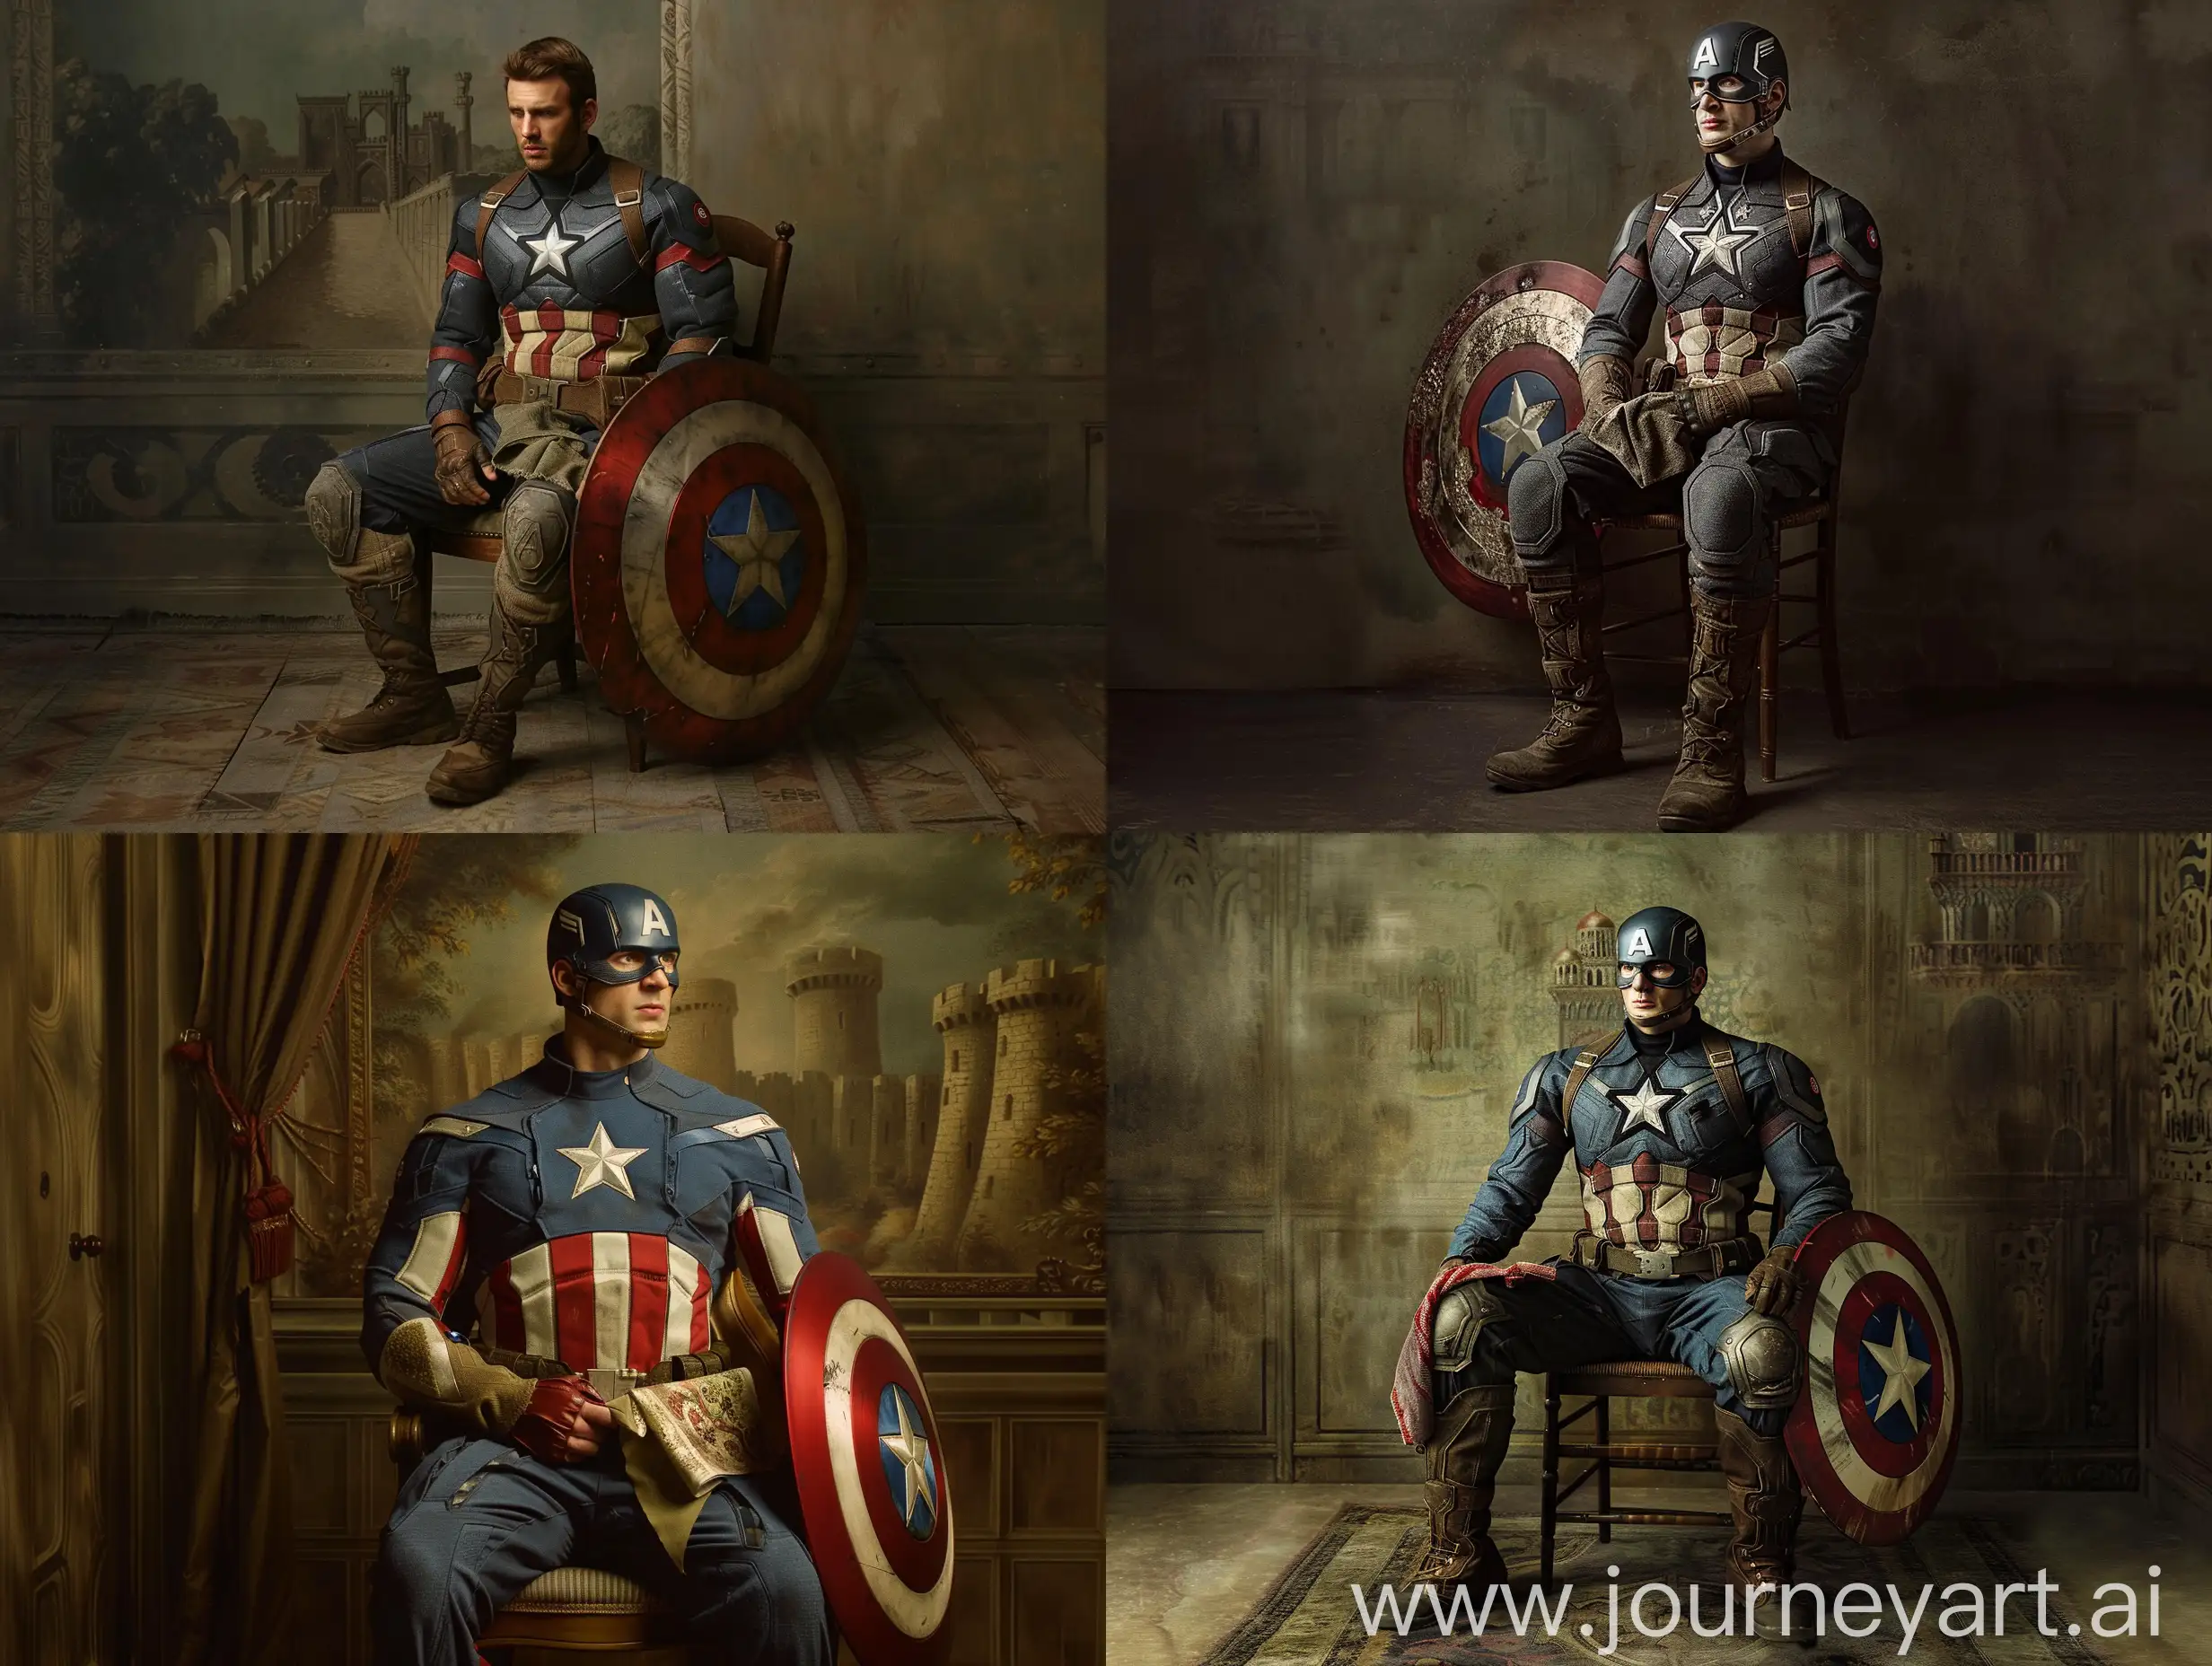 Crusader-Captain-America-in-15th-Century-Camelot-Palace